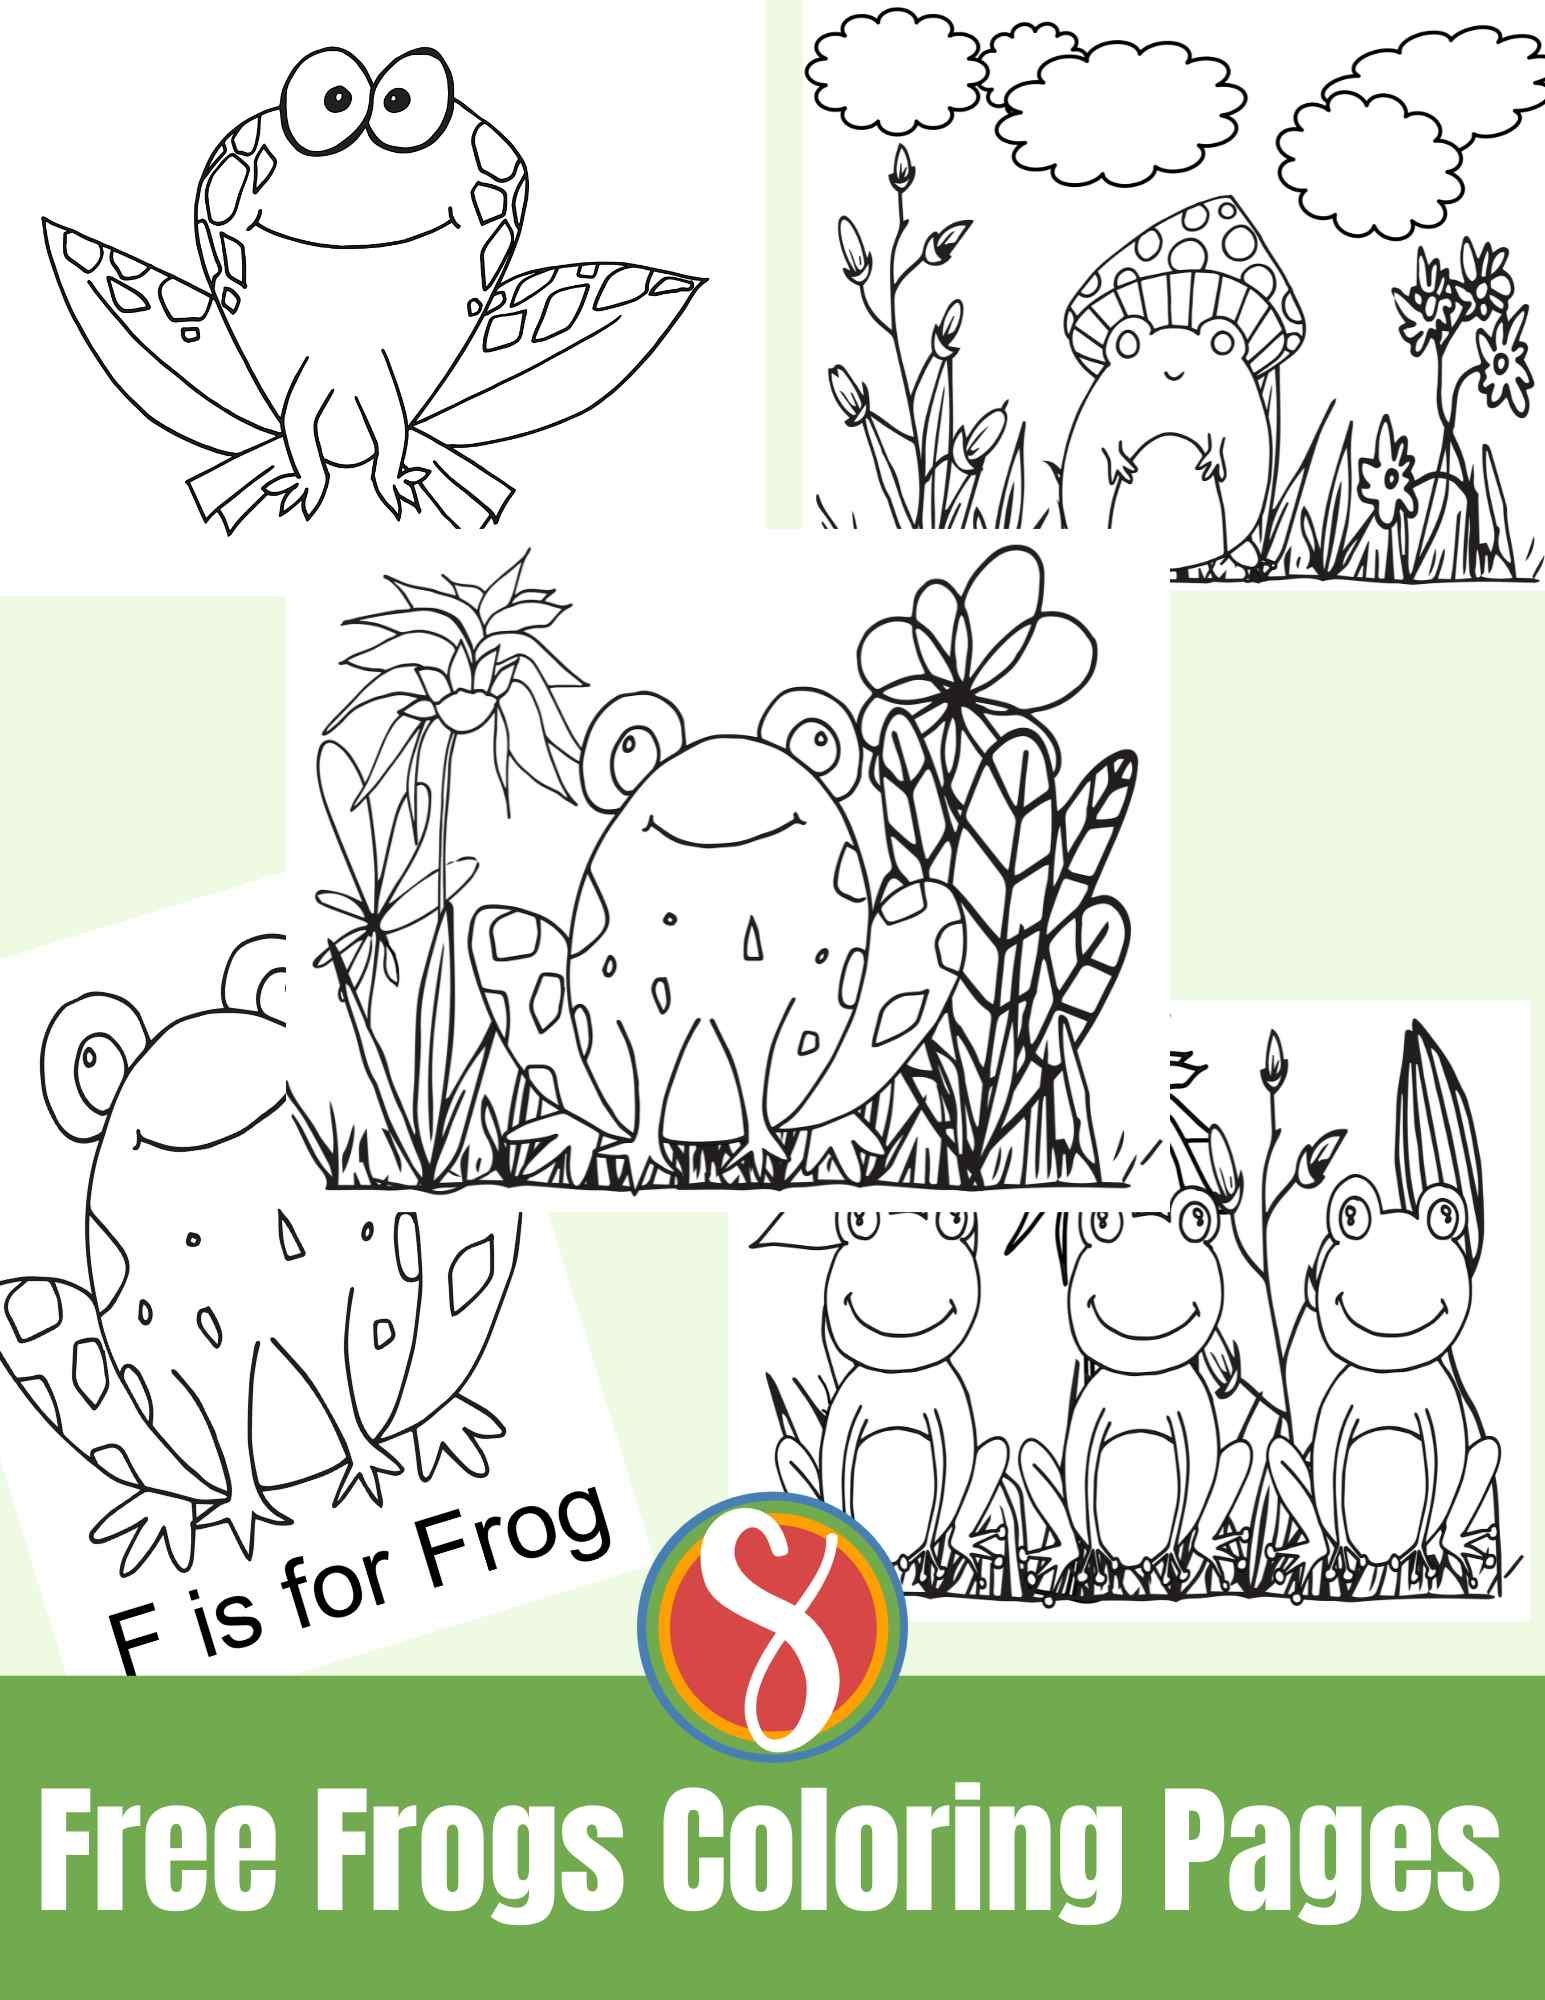 Free frog coloring pages â stevie doodles